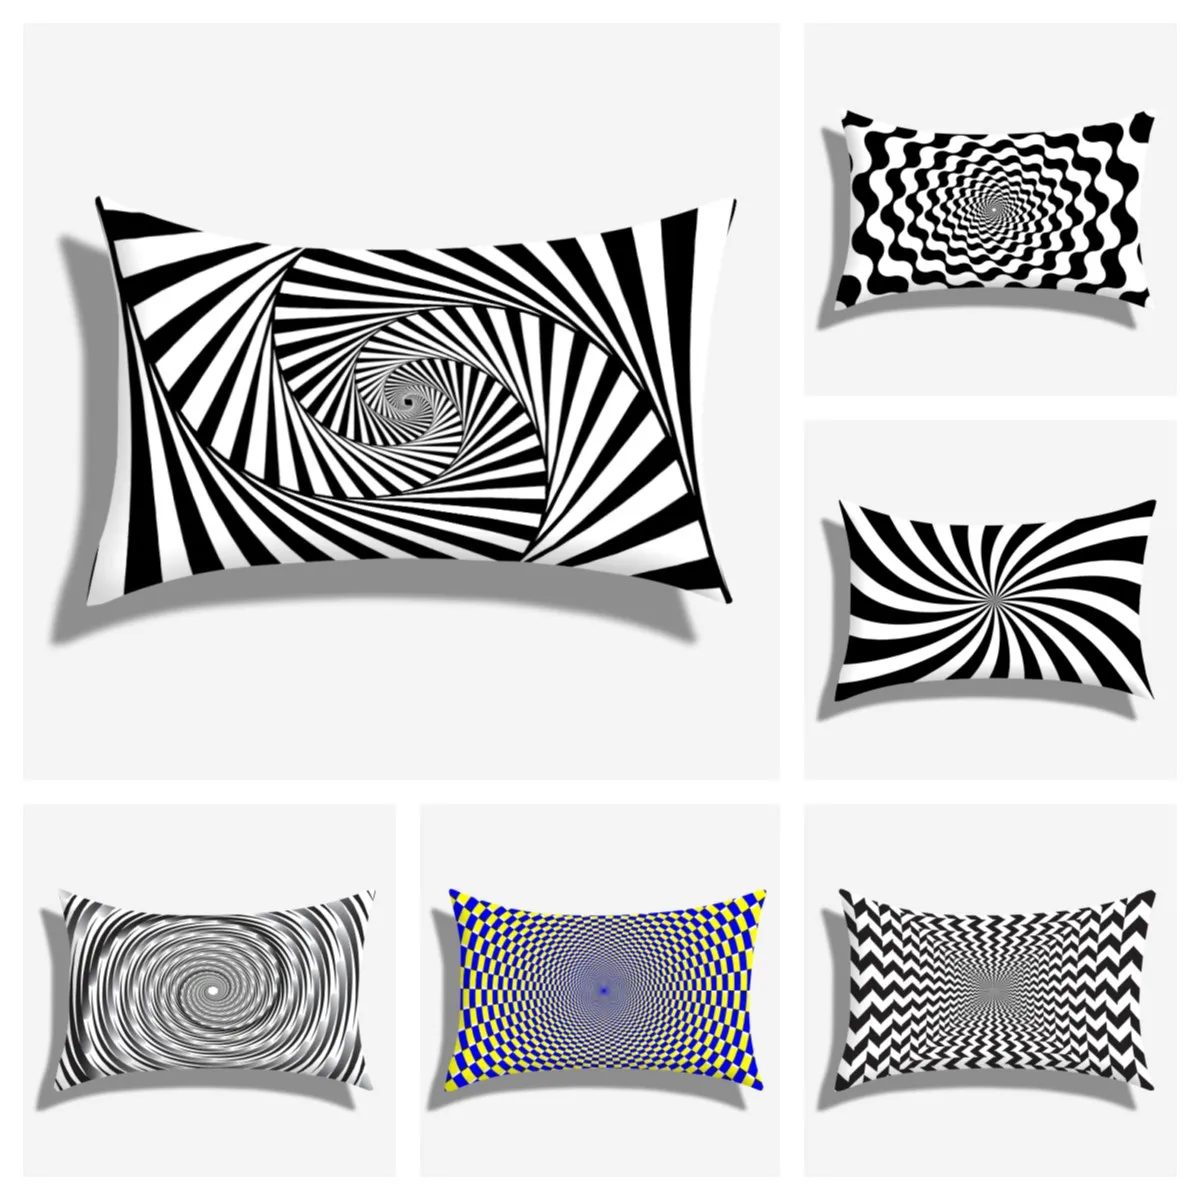 

Black and white spiral pillow covers ，30x50 40x60 cushion cover，Pillow covers decorative， home decor ，Customize your own pattern